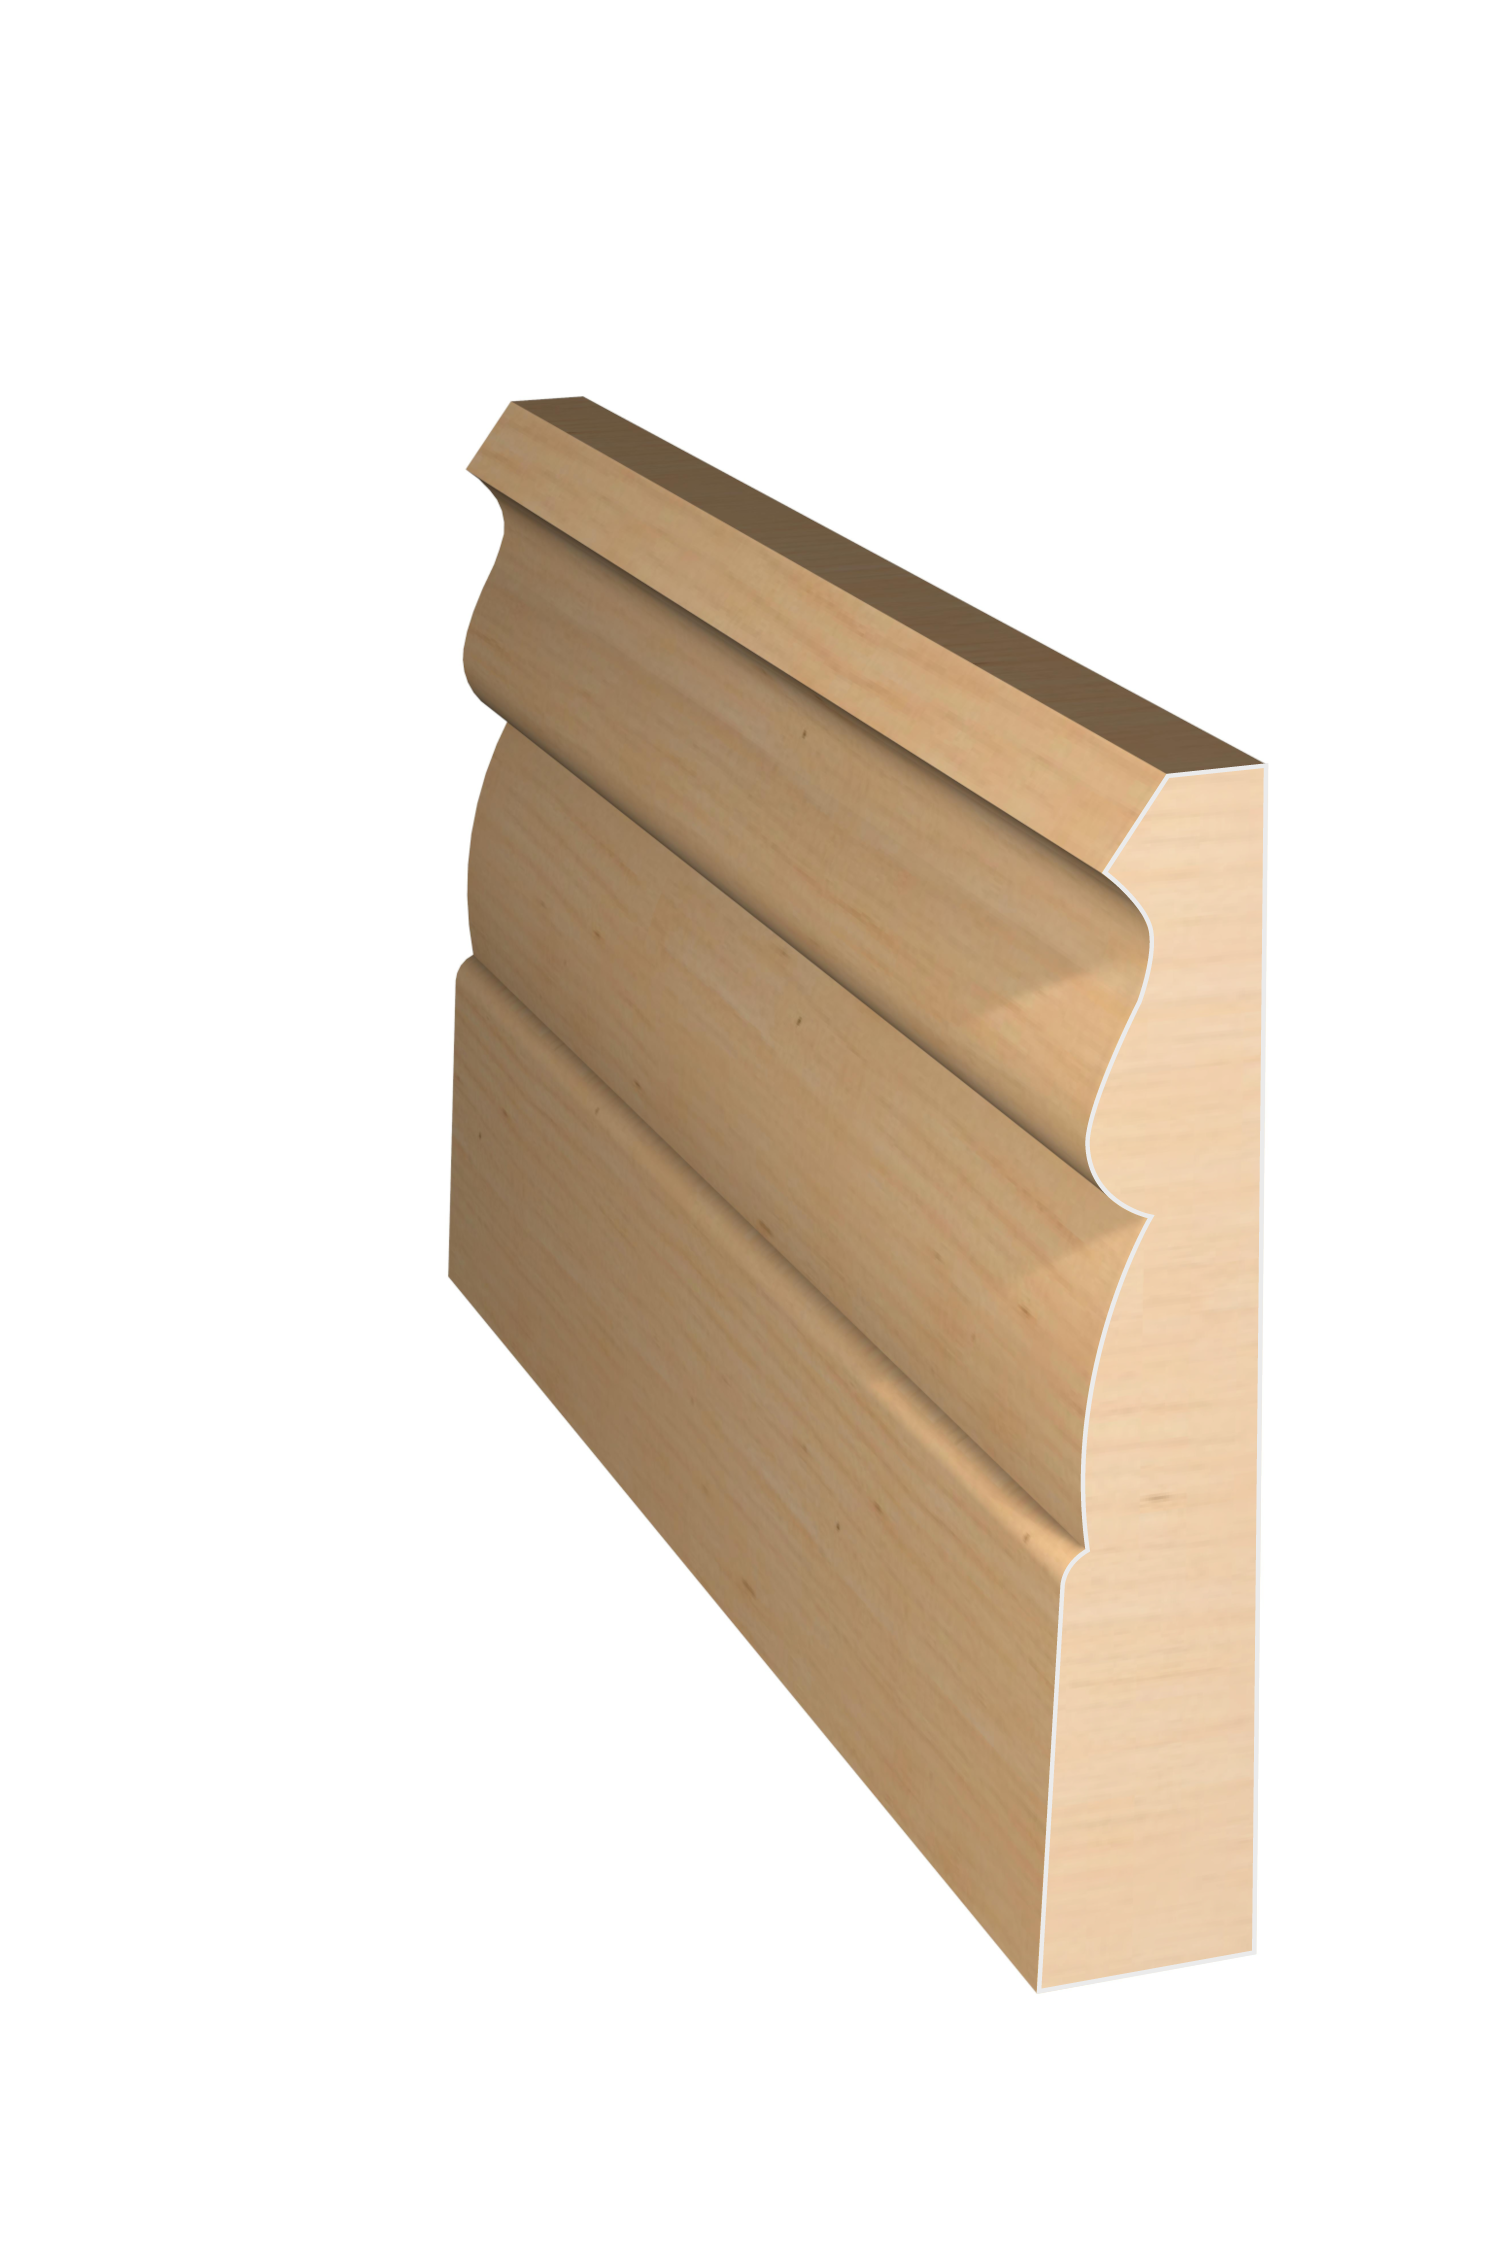 Three dimensional rendering of custom casing wood molding CAPL31423 made by Public Lumber Company in Detroit.